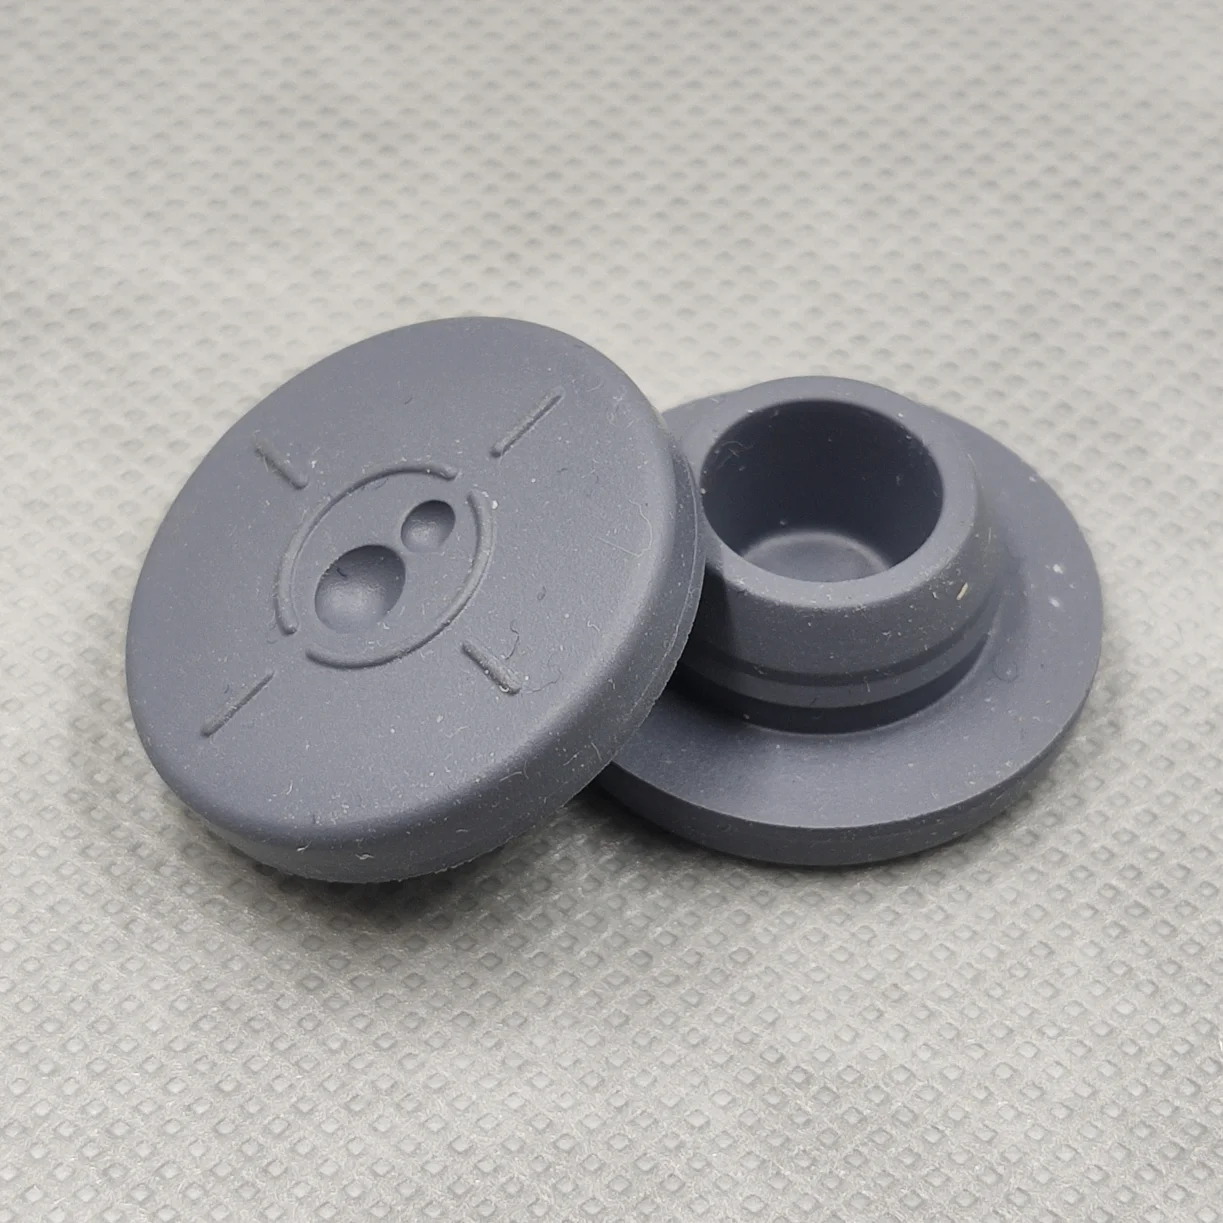 20mm medical rubber IV bag stopper for infusion and injection